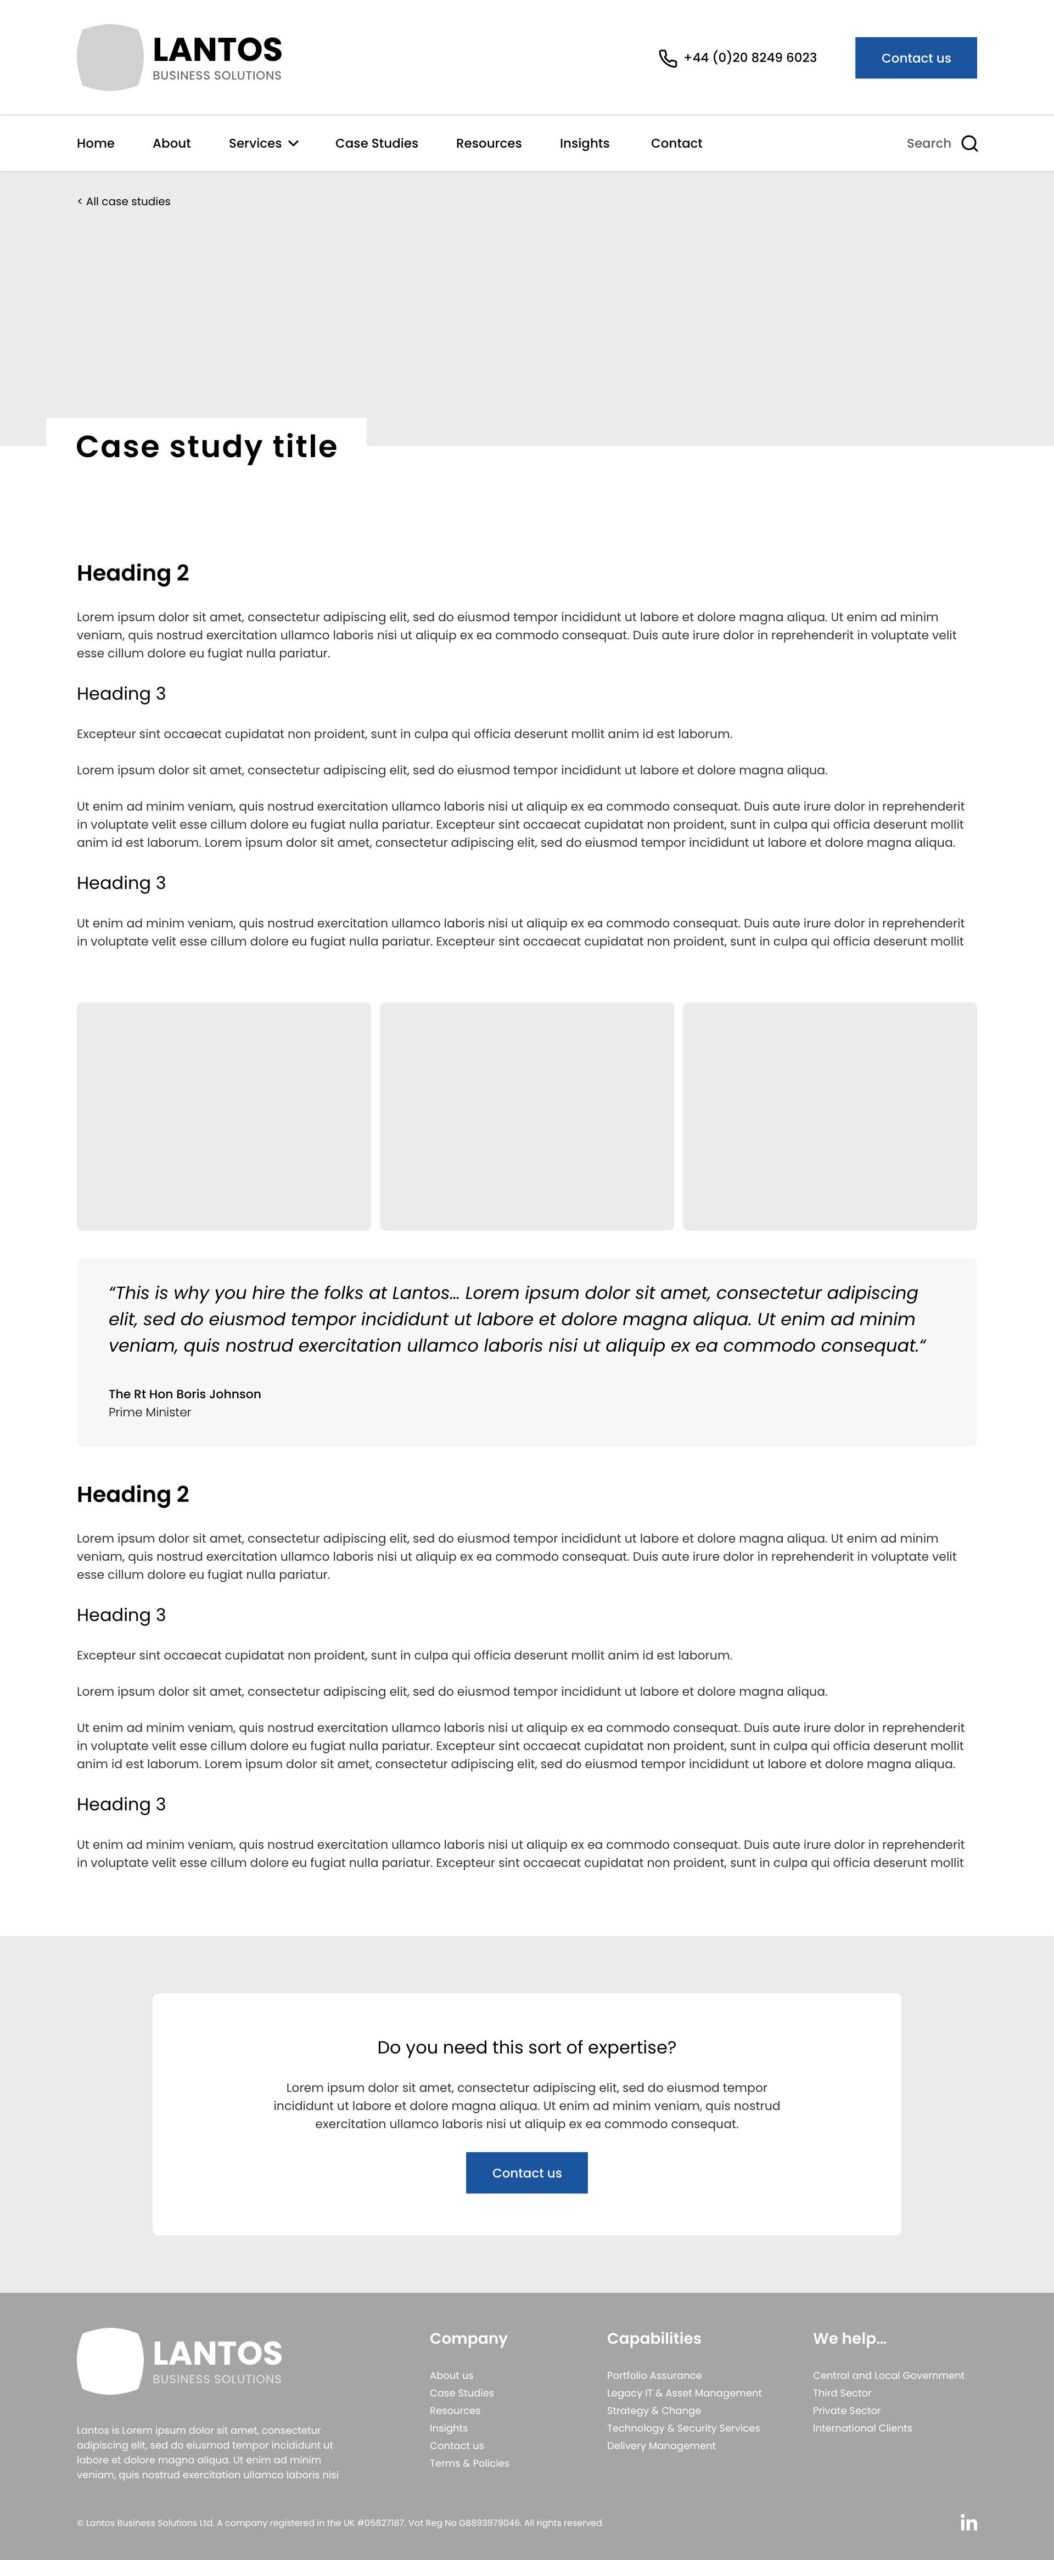 ethical-pixels-case-study-lantos-business-solutions-case-study-wireframe